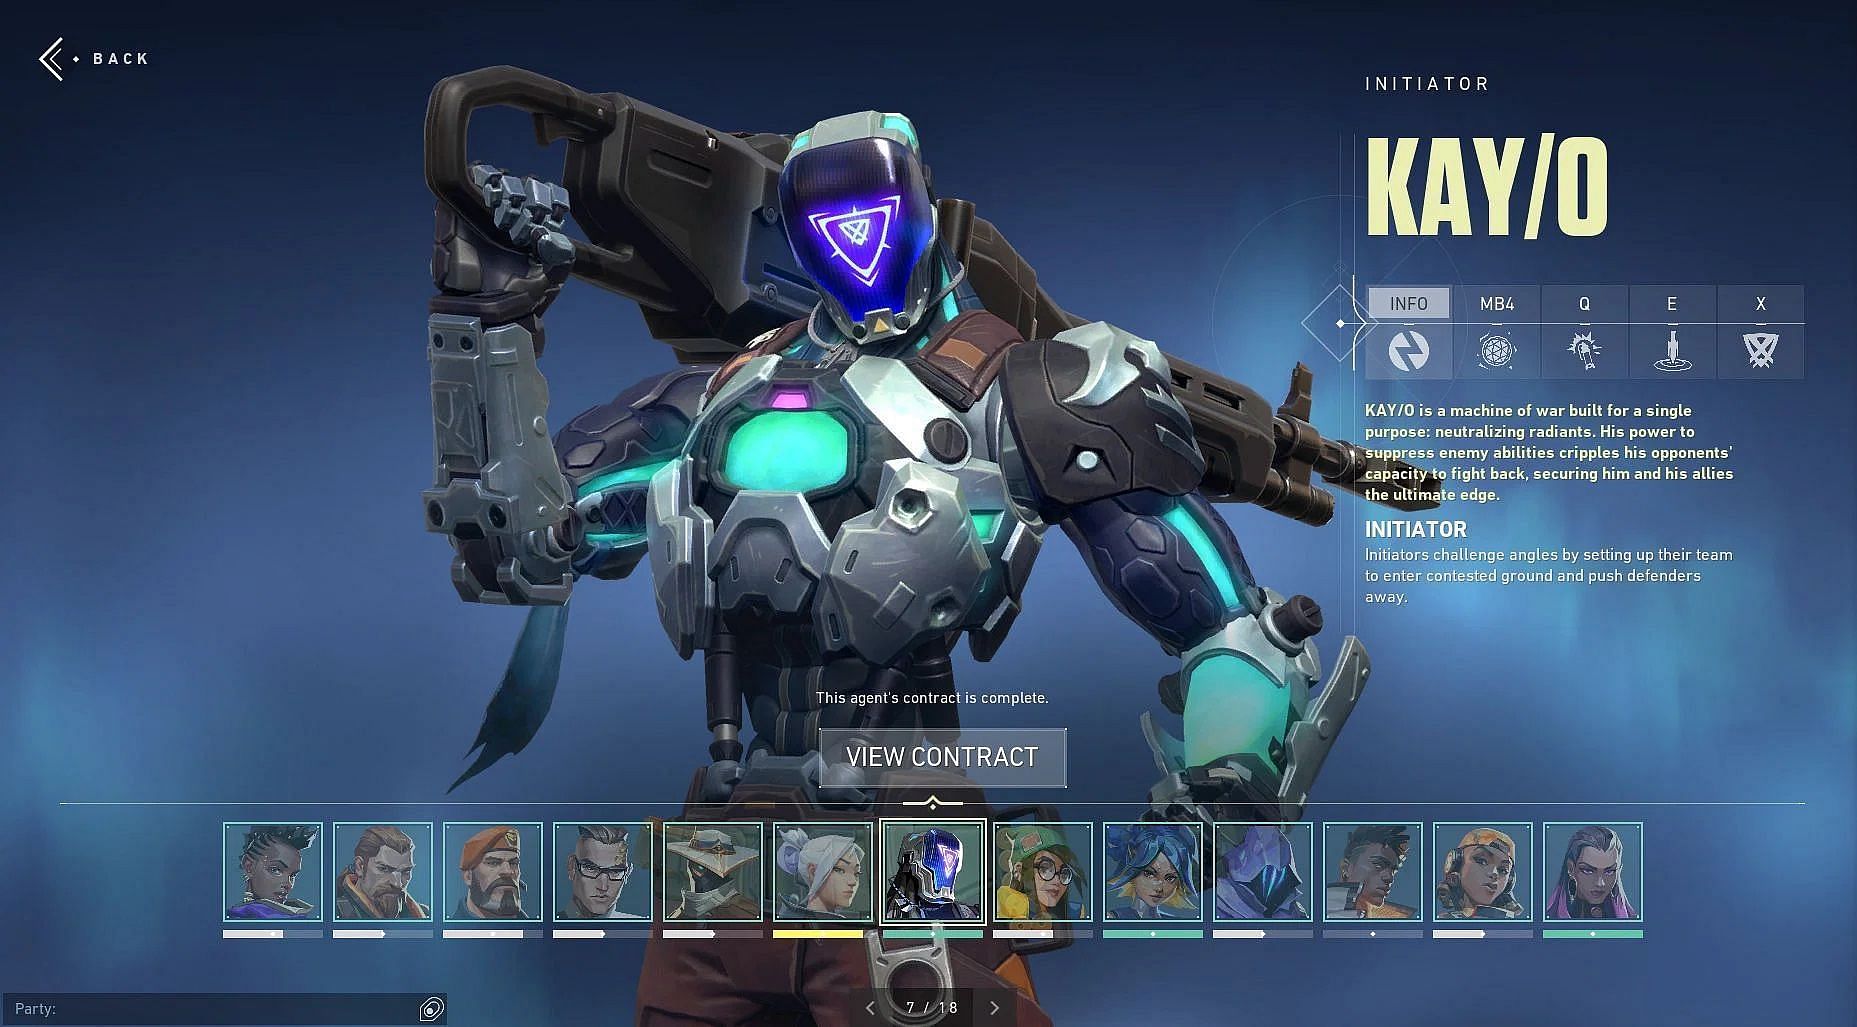 KAY/O is another initiator in Valorant (Image via Riot Games)